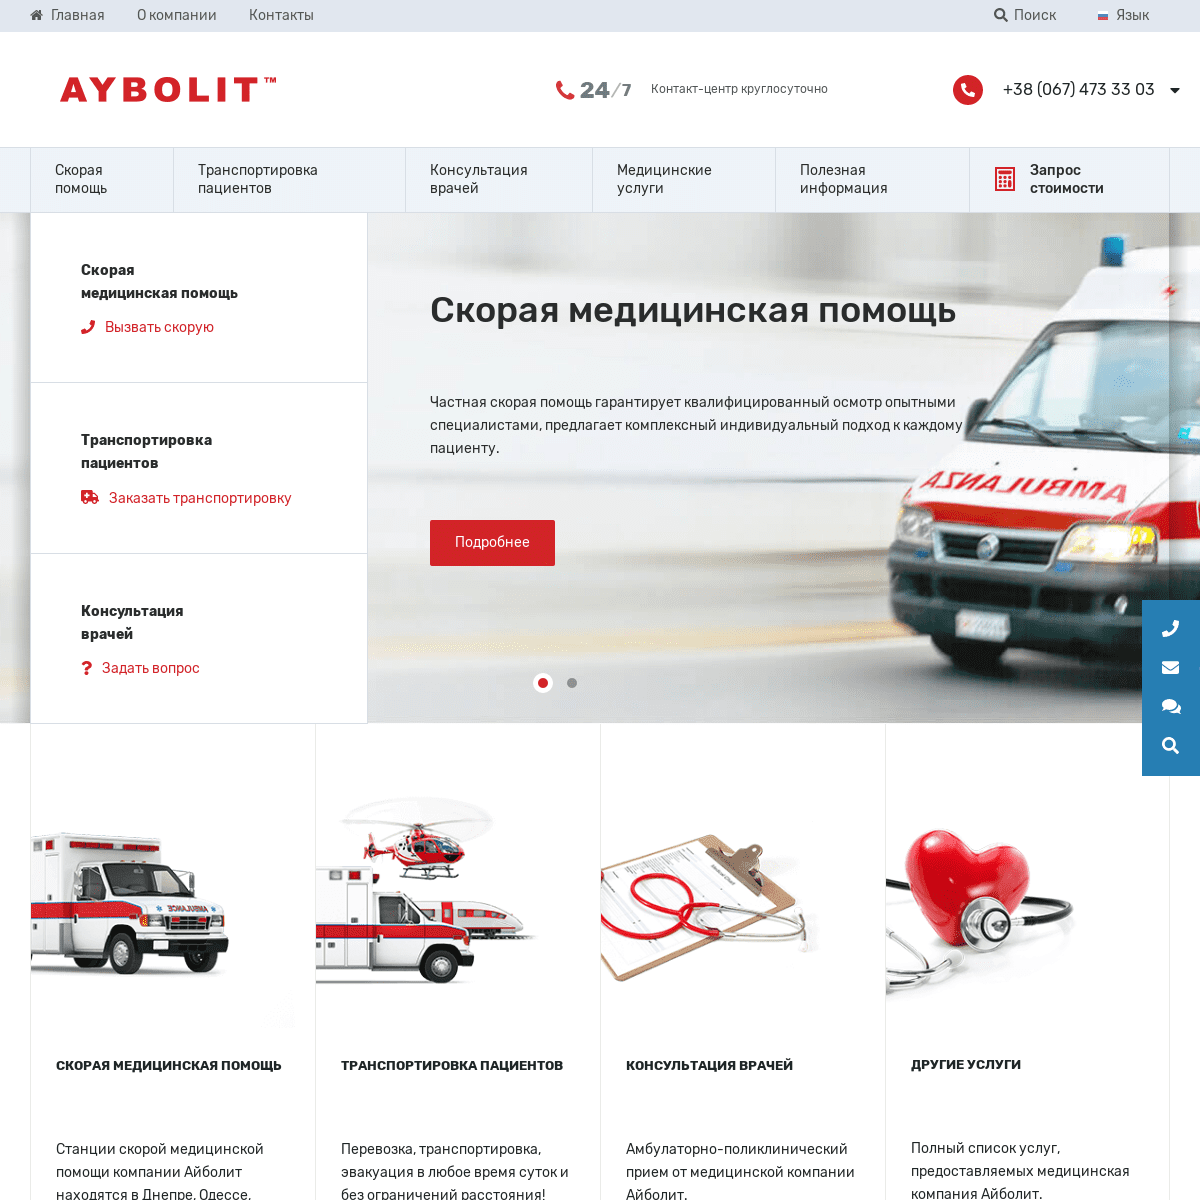 A complete backup of aybolit.org